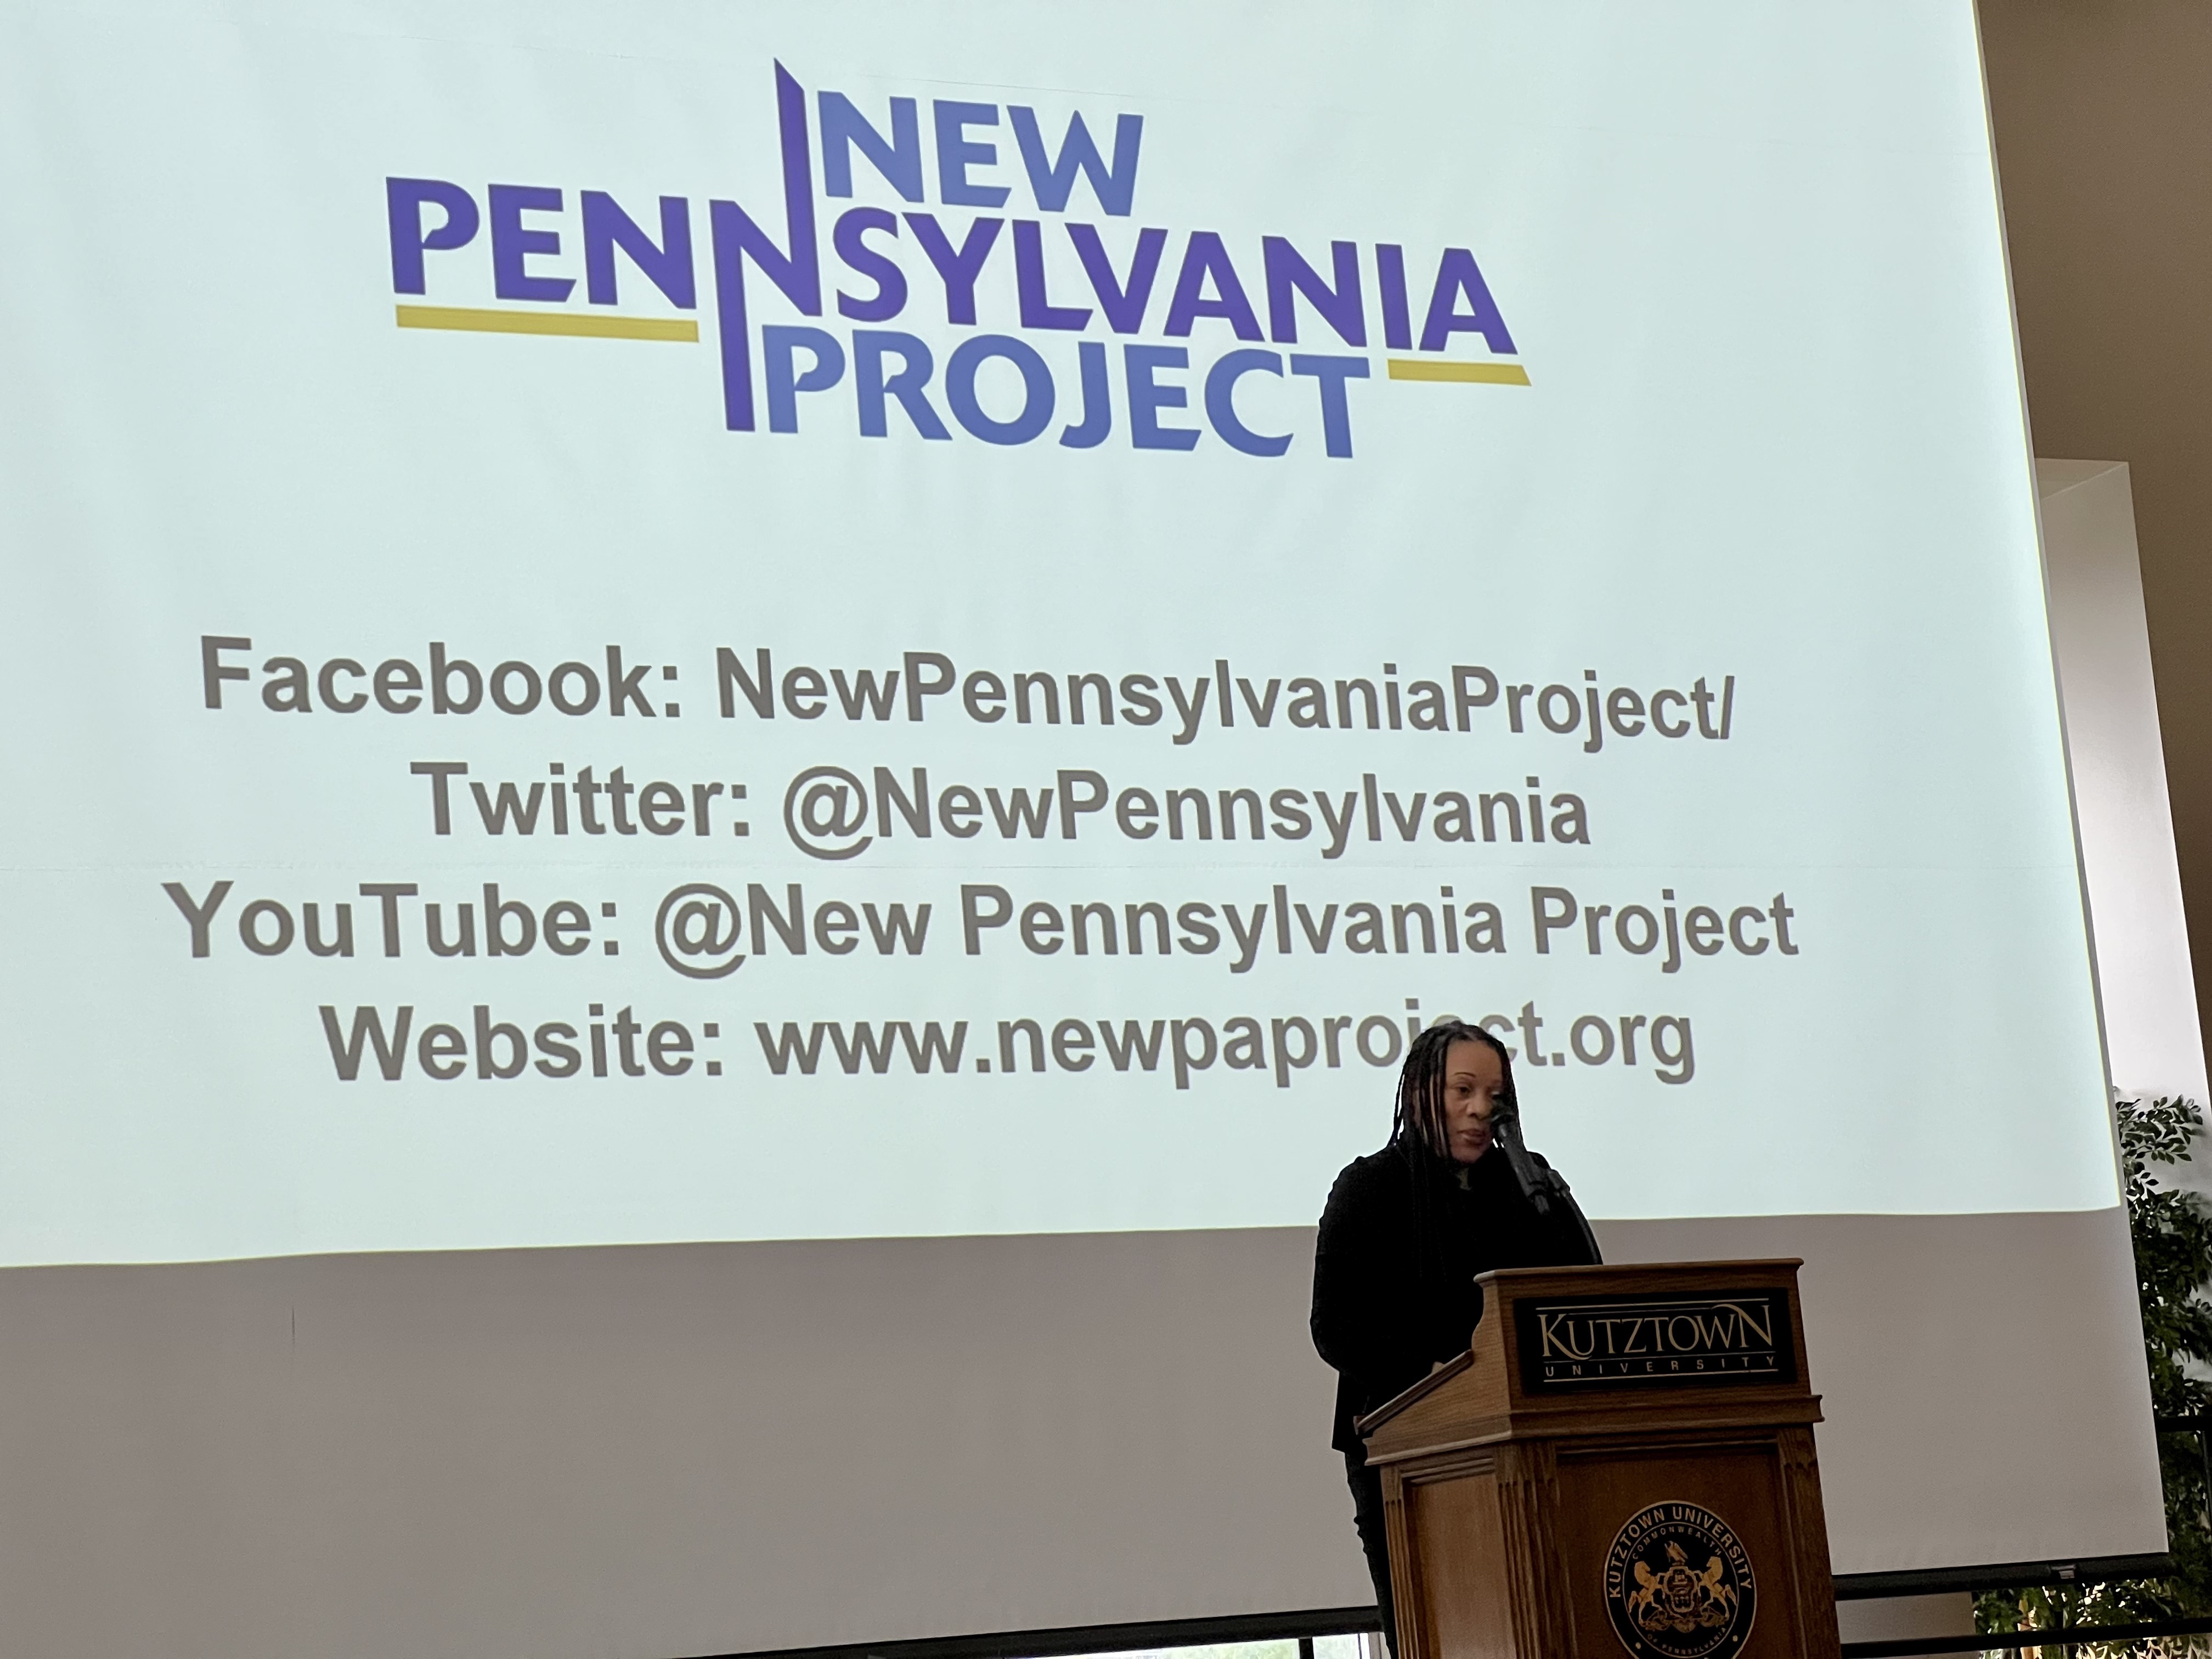 Person standing at KU podium with screen projecting New Pennsylvania Project behind